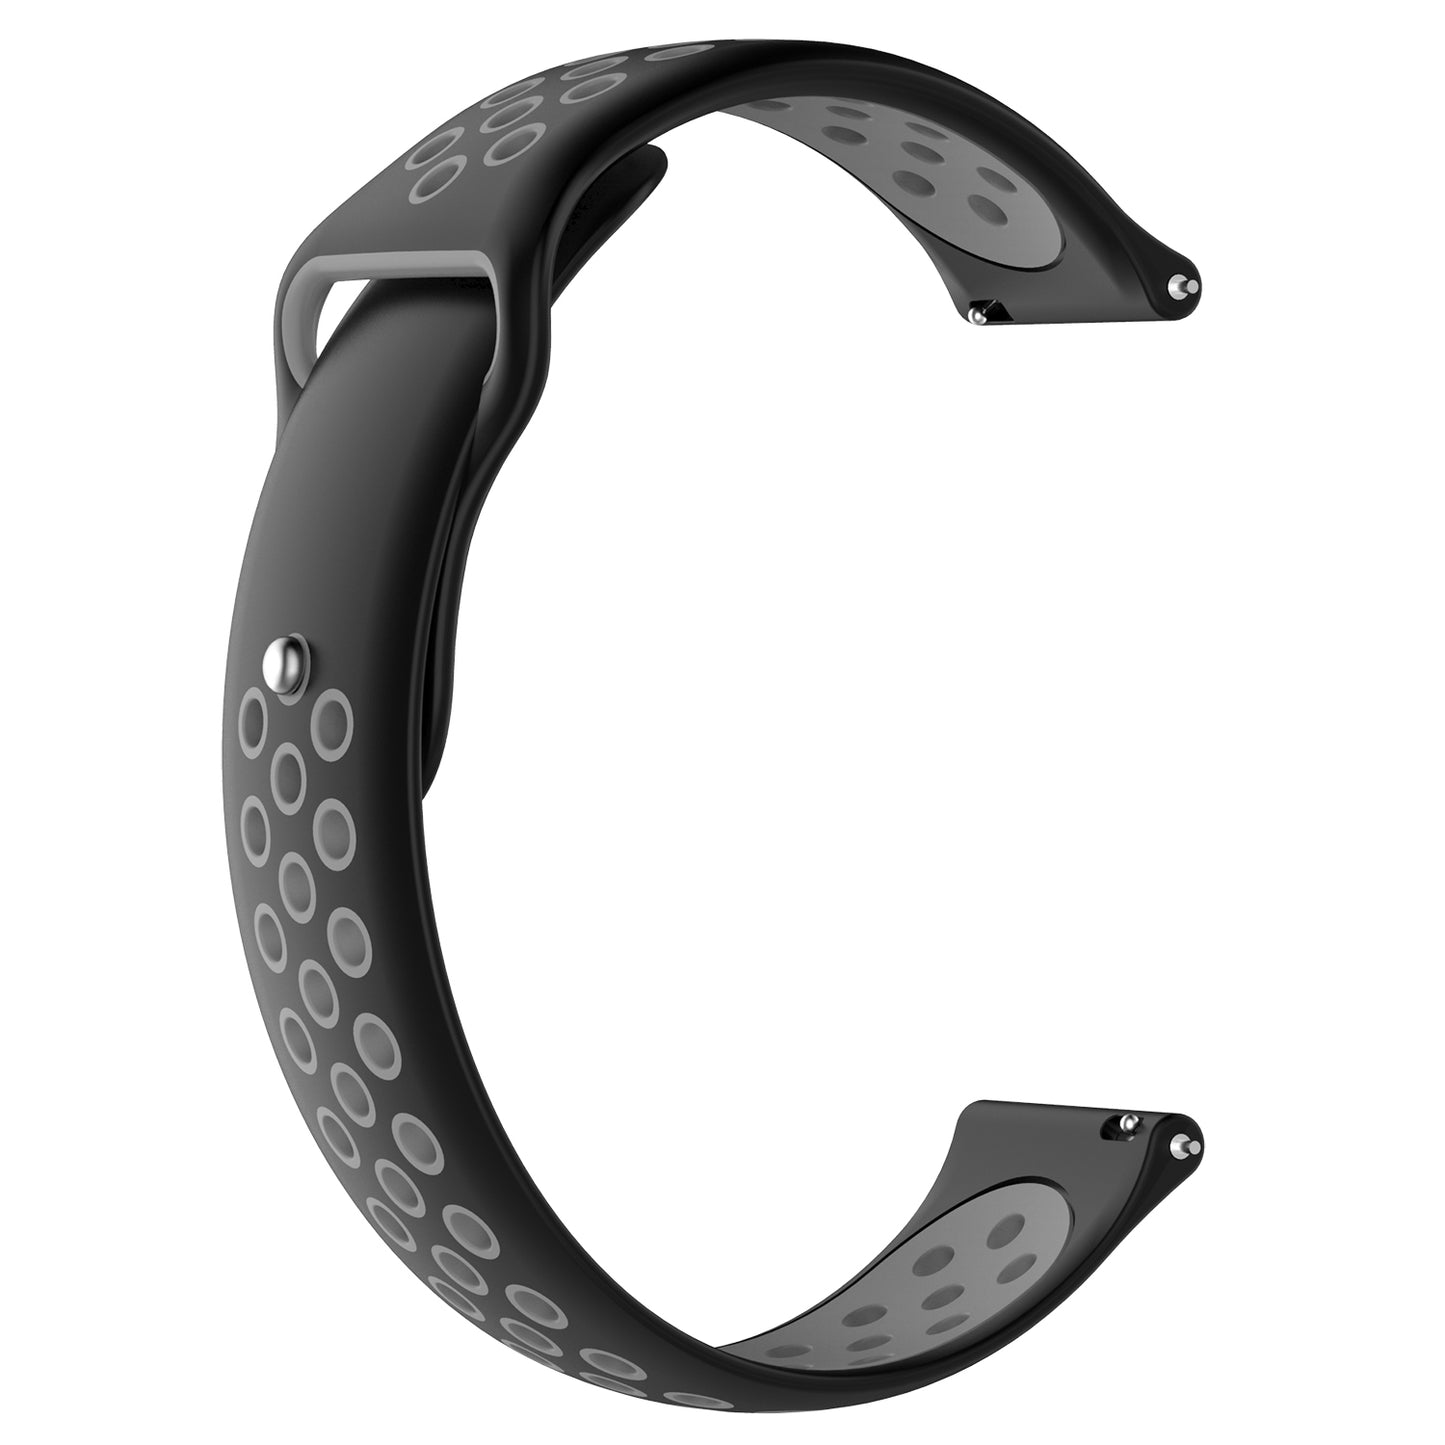 Perforated Rubber Strap for Fitbit Versa & Versa 2